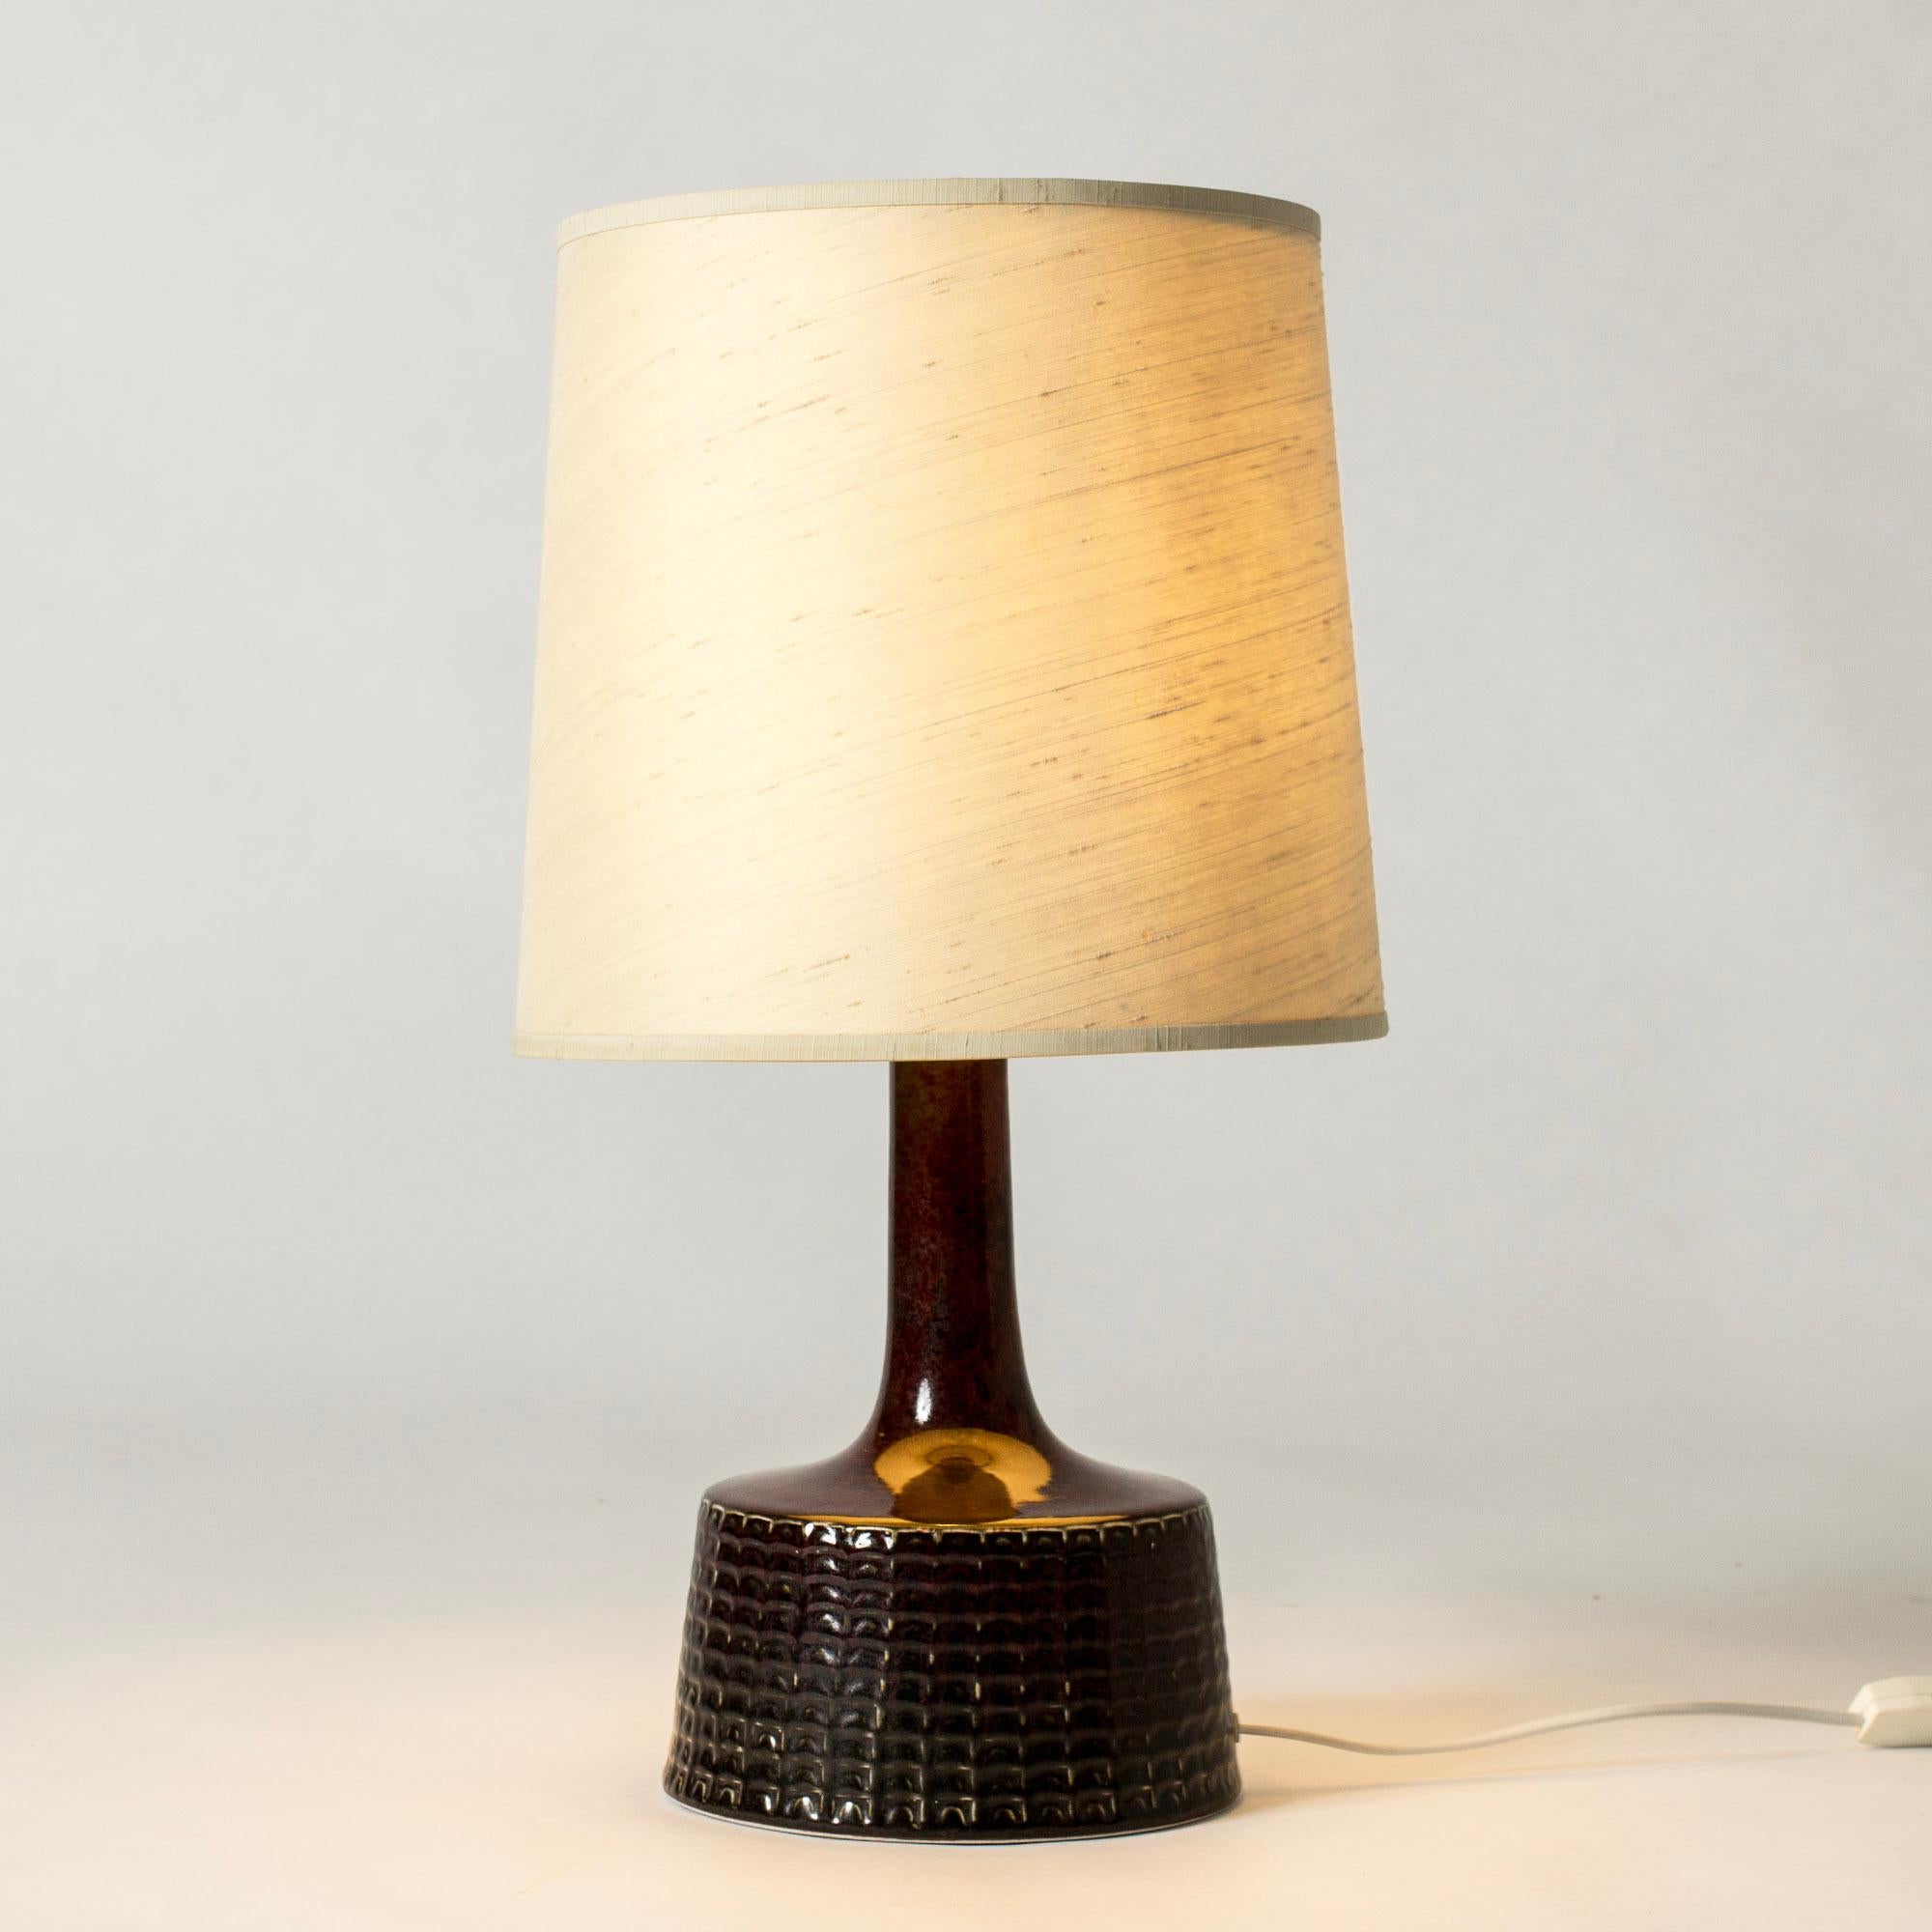 Cool table lamp by Stig Lindberg, with a stoneware base embossed with a graphic pattern and glazed dark red. Original raw silk shade.